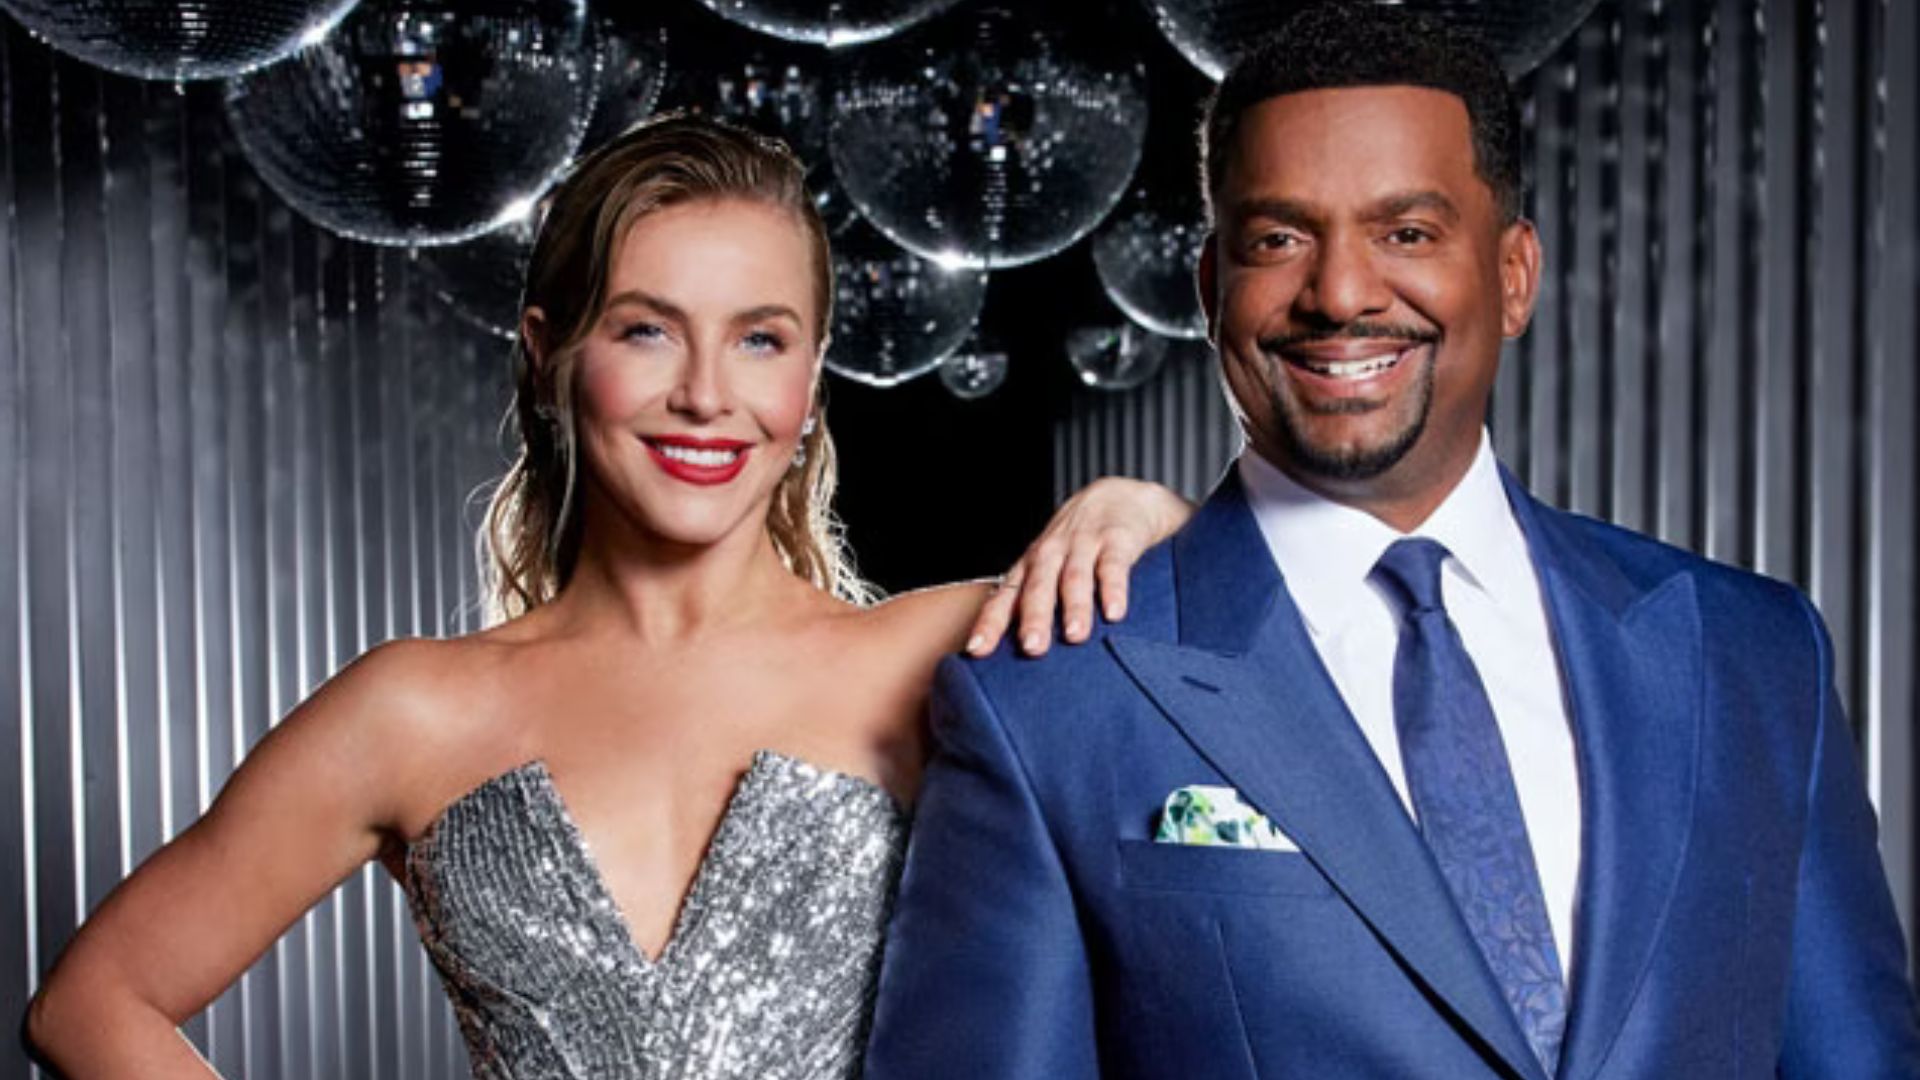 DWTS Season 32: Meet The Dancing With The Stars Cast